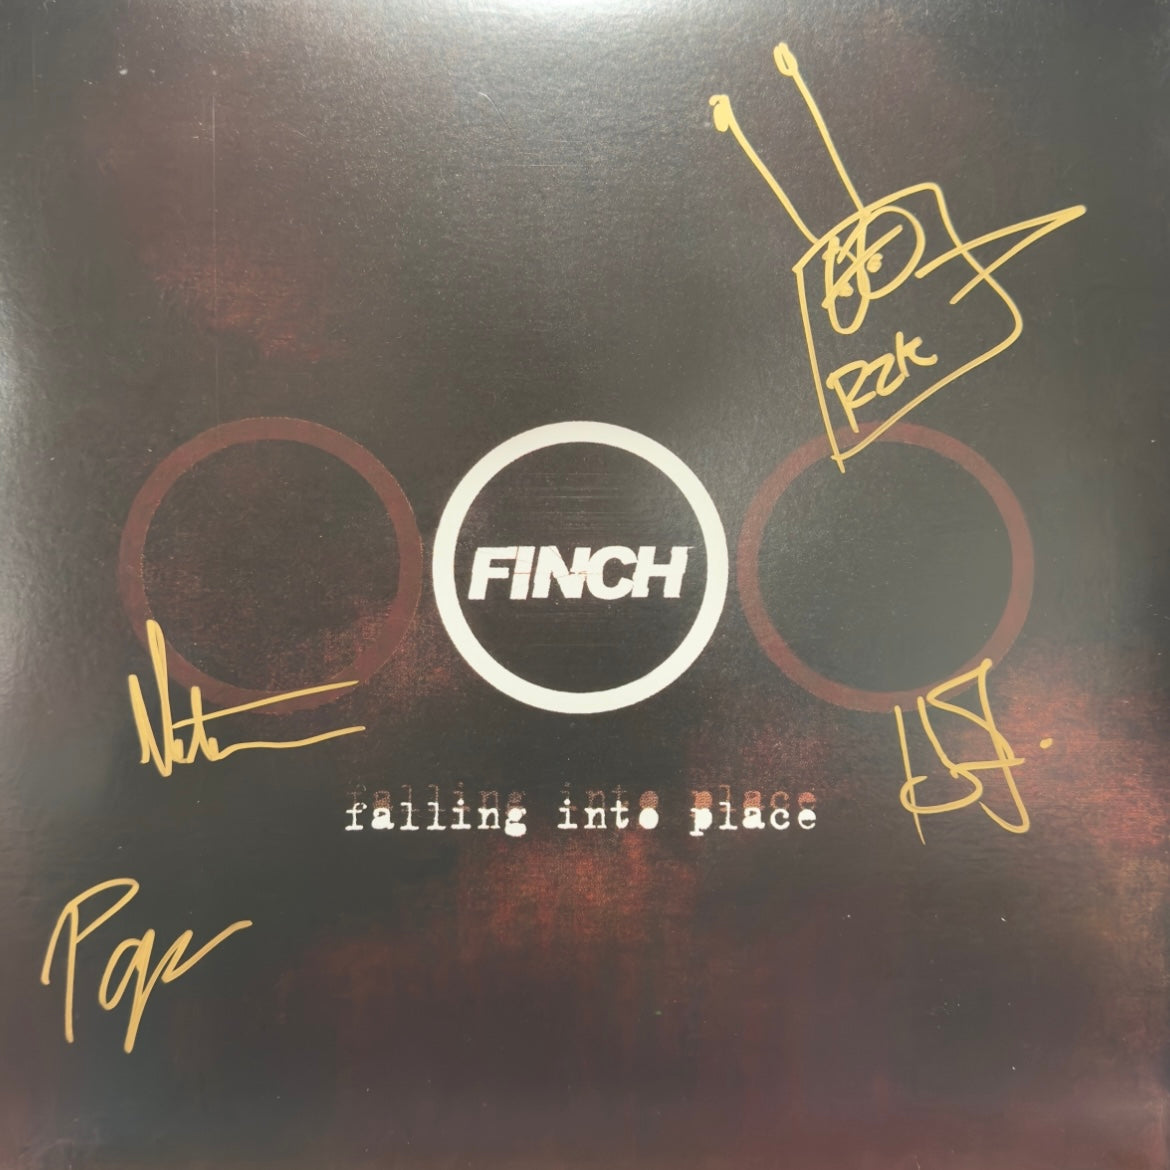 Finch - Falling Into Place - signed record